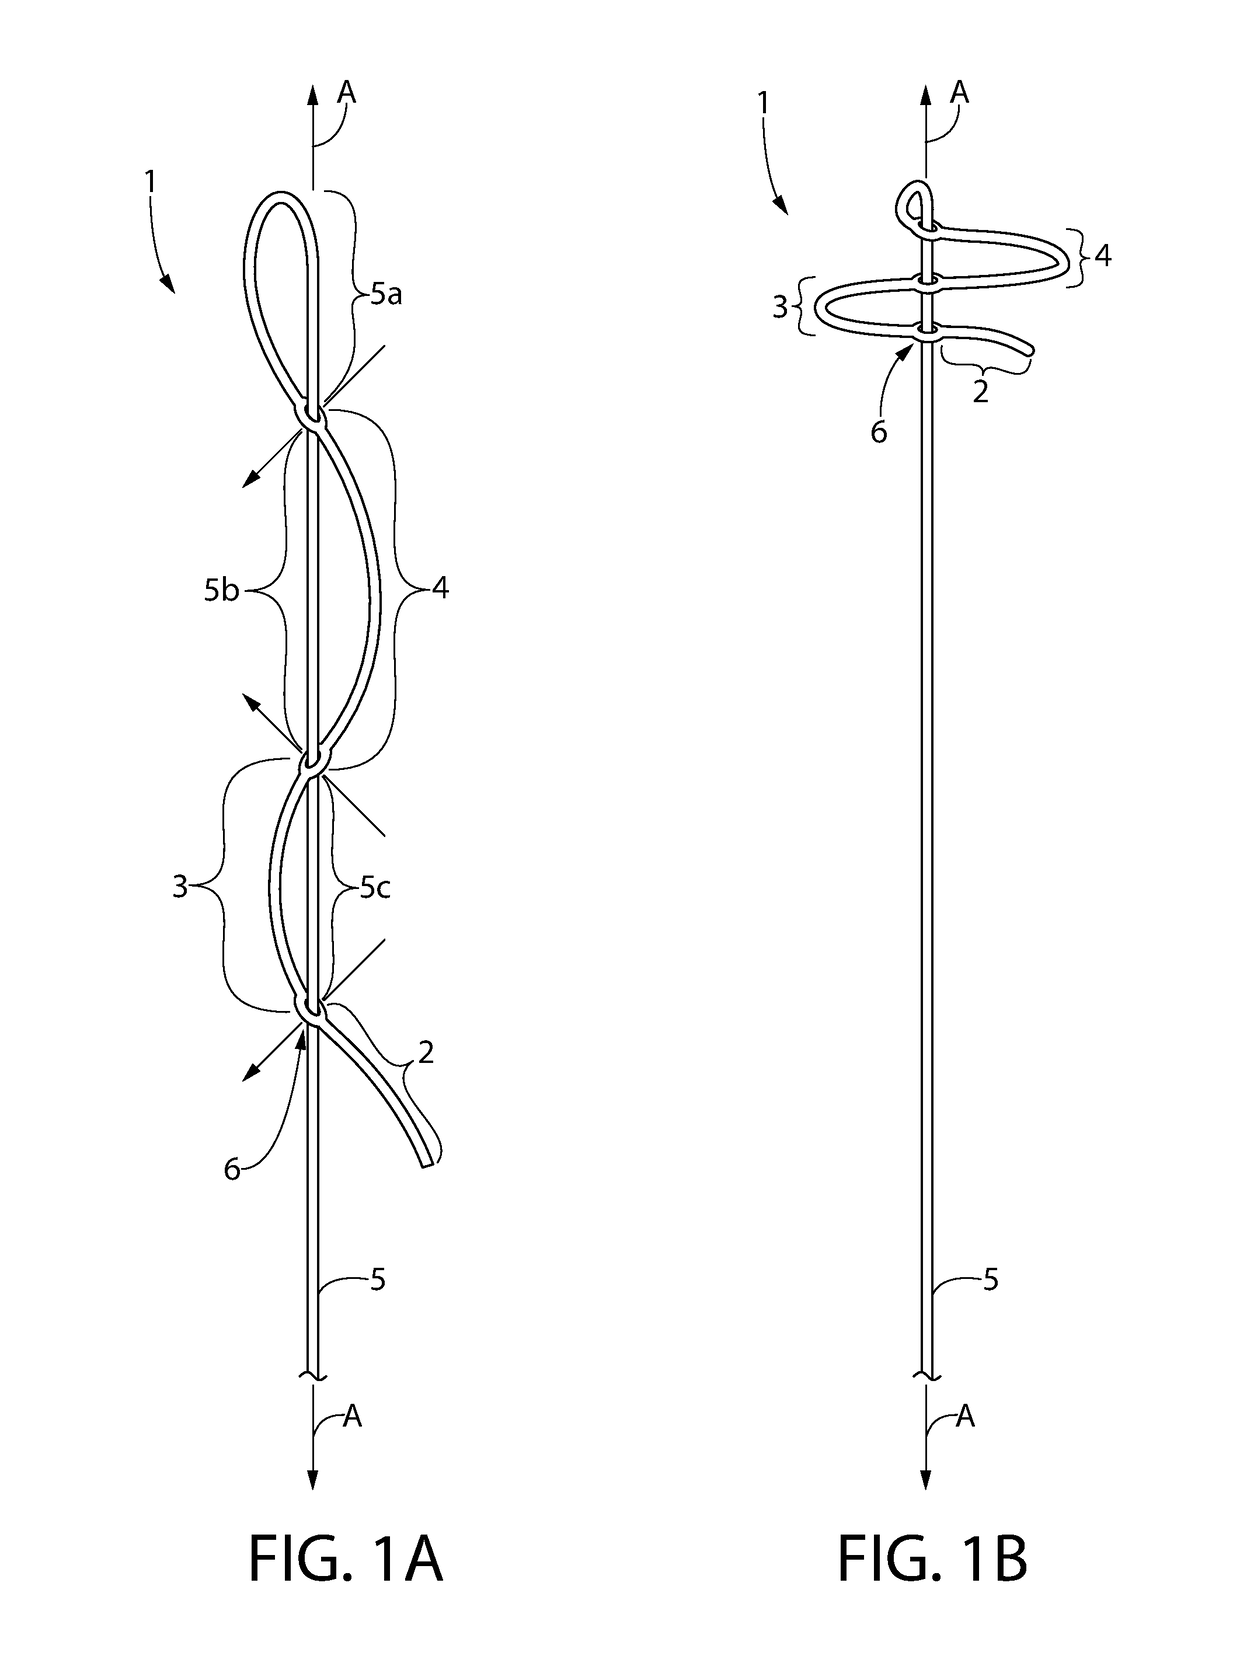 Expanding suture knot anchor and device for placement of same